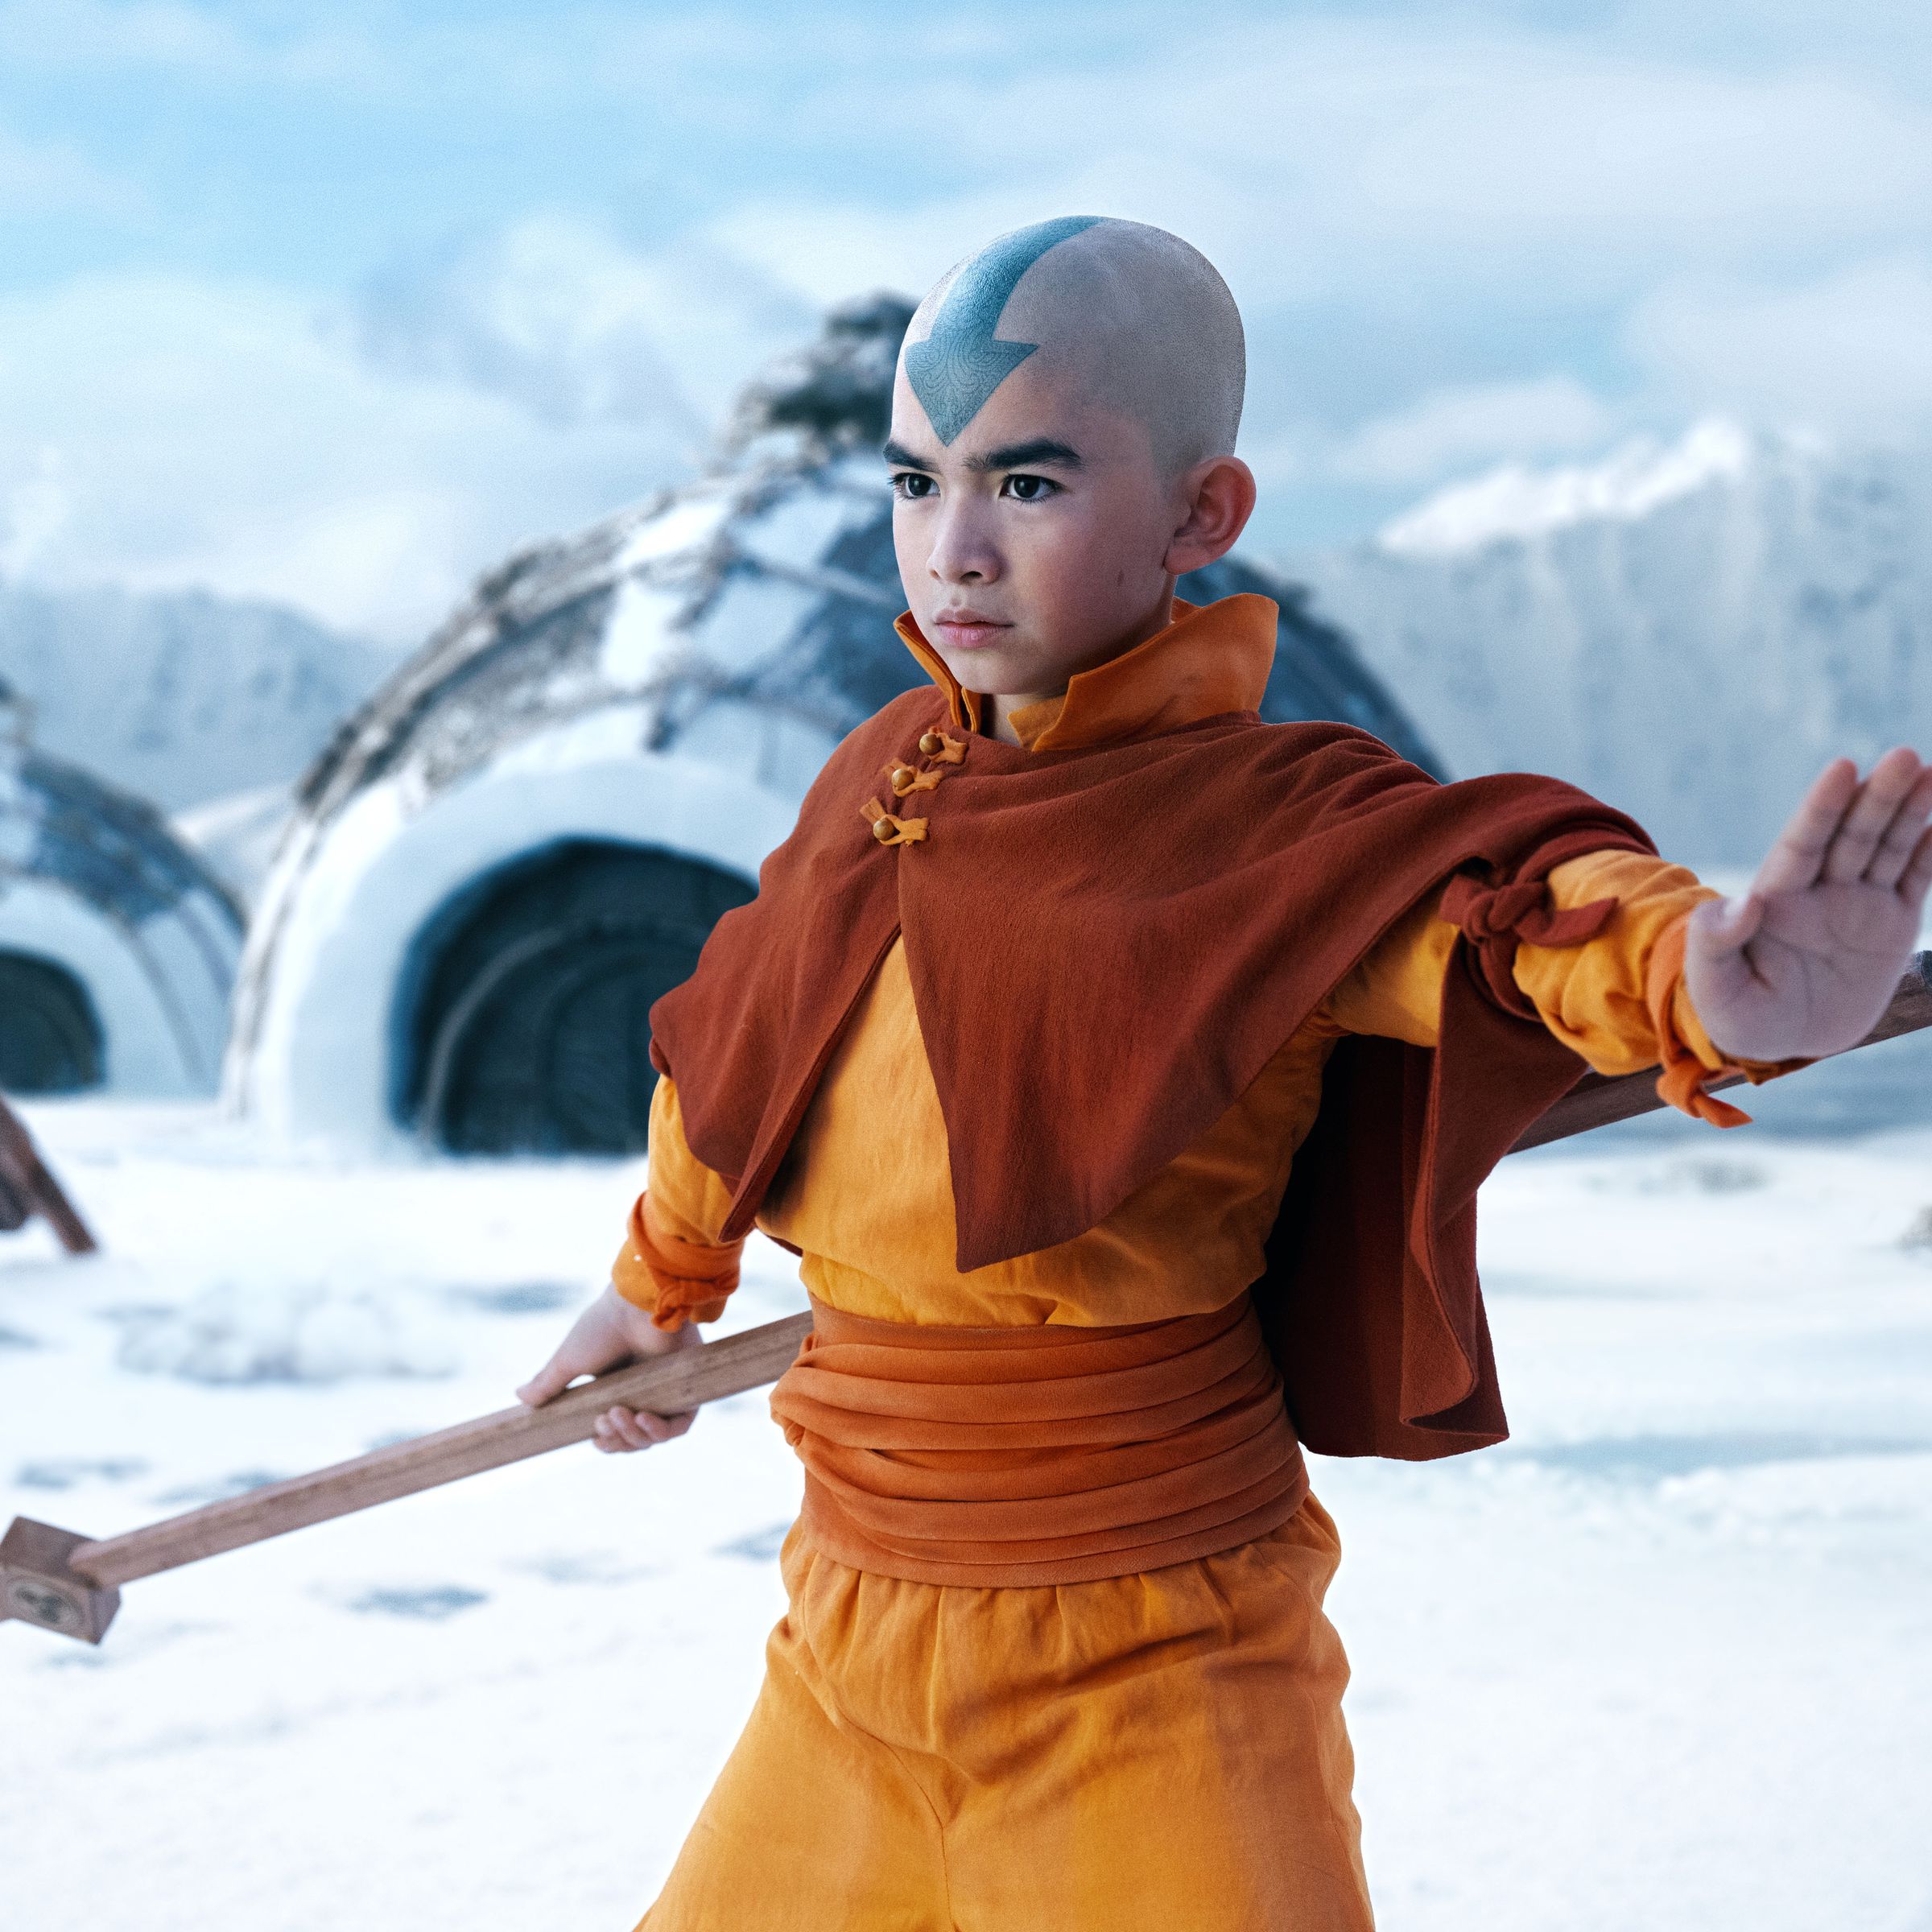 A bald boy whose head is adorned with a large, blue arrow tattoo. The boy is wearing an orange jumpsuit-like outfit accented with a short cape. The boy is also holding a wooden staff, holding out his free hand in defense, and standing in a frozen tundra.